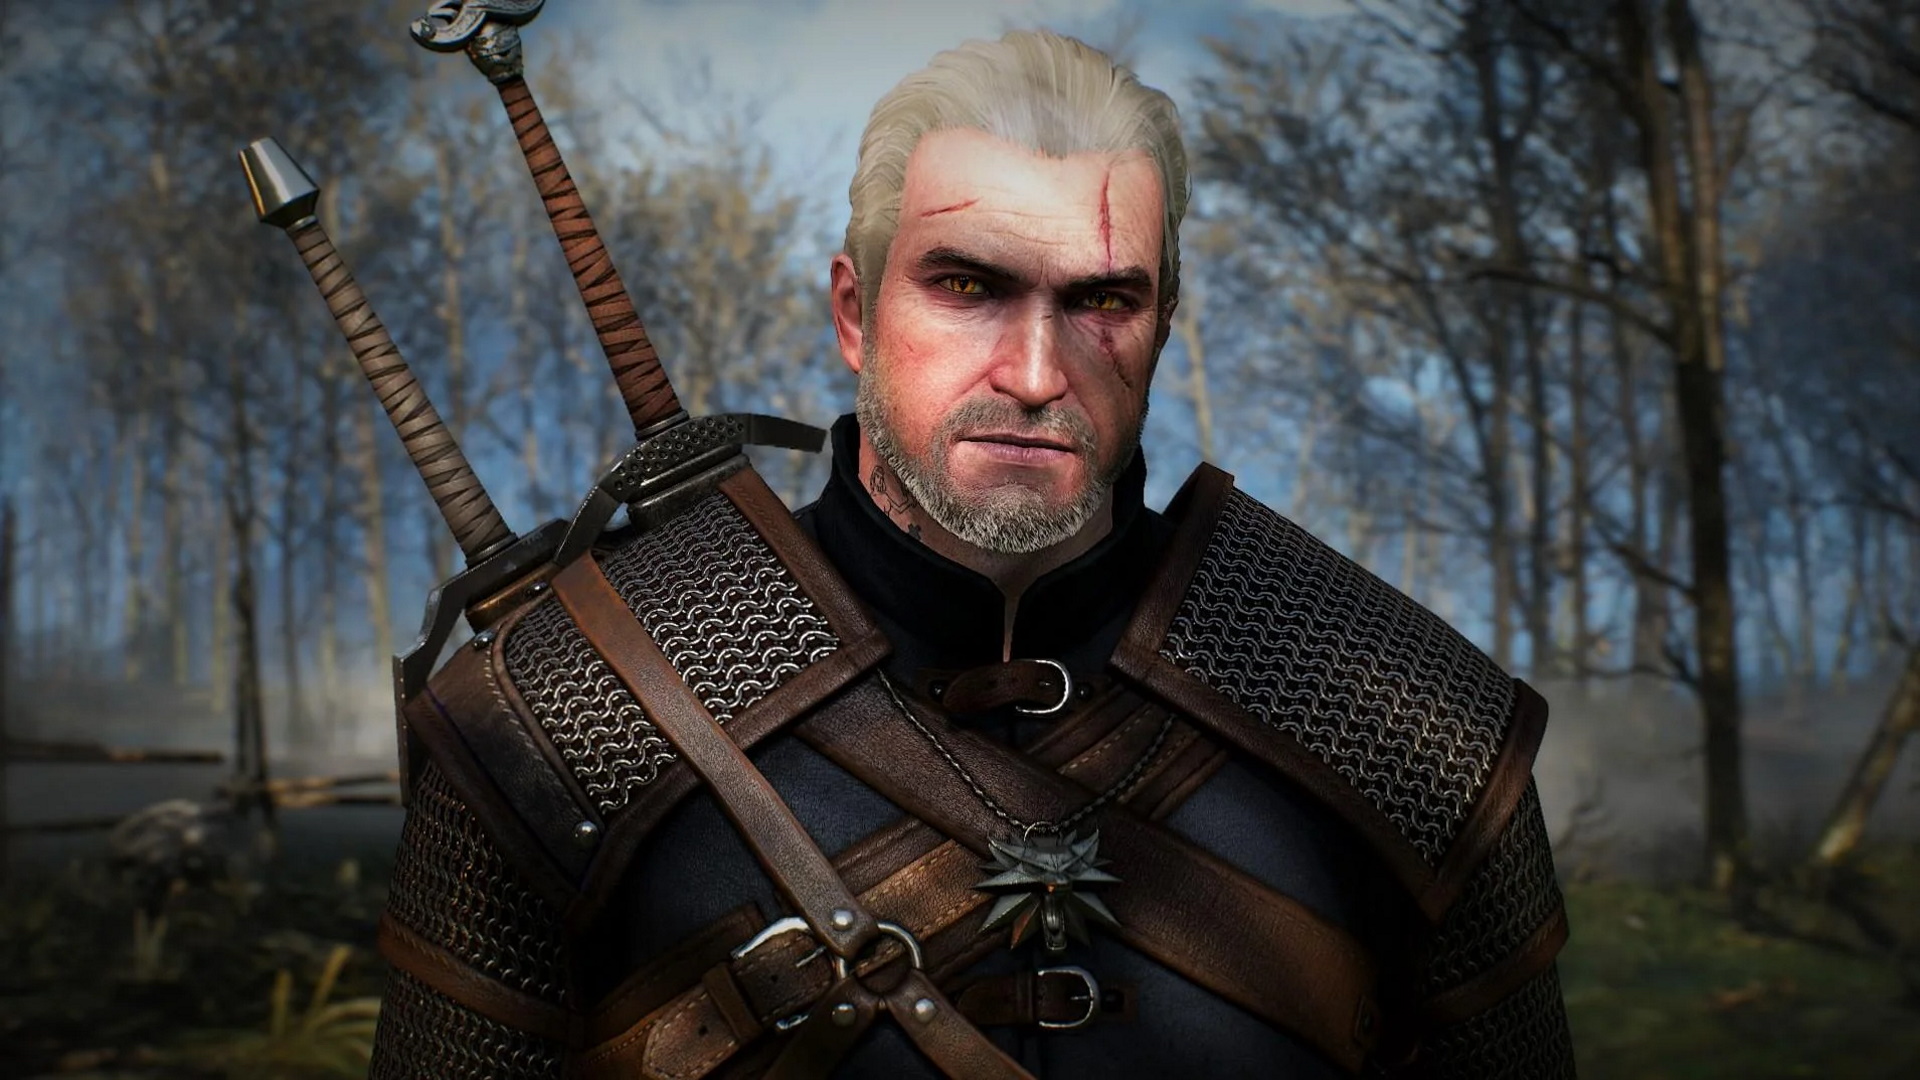 This Sims 4 mod lets you play with Geralt of Rivia